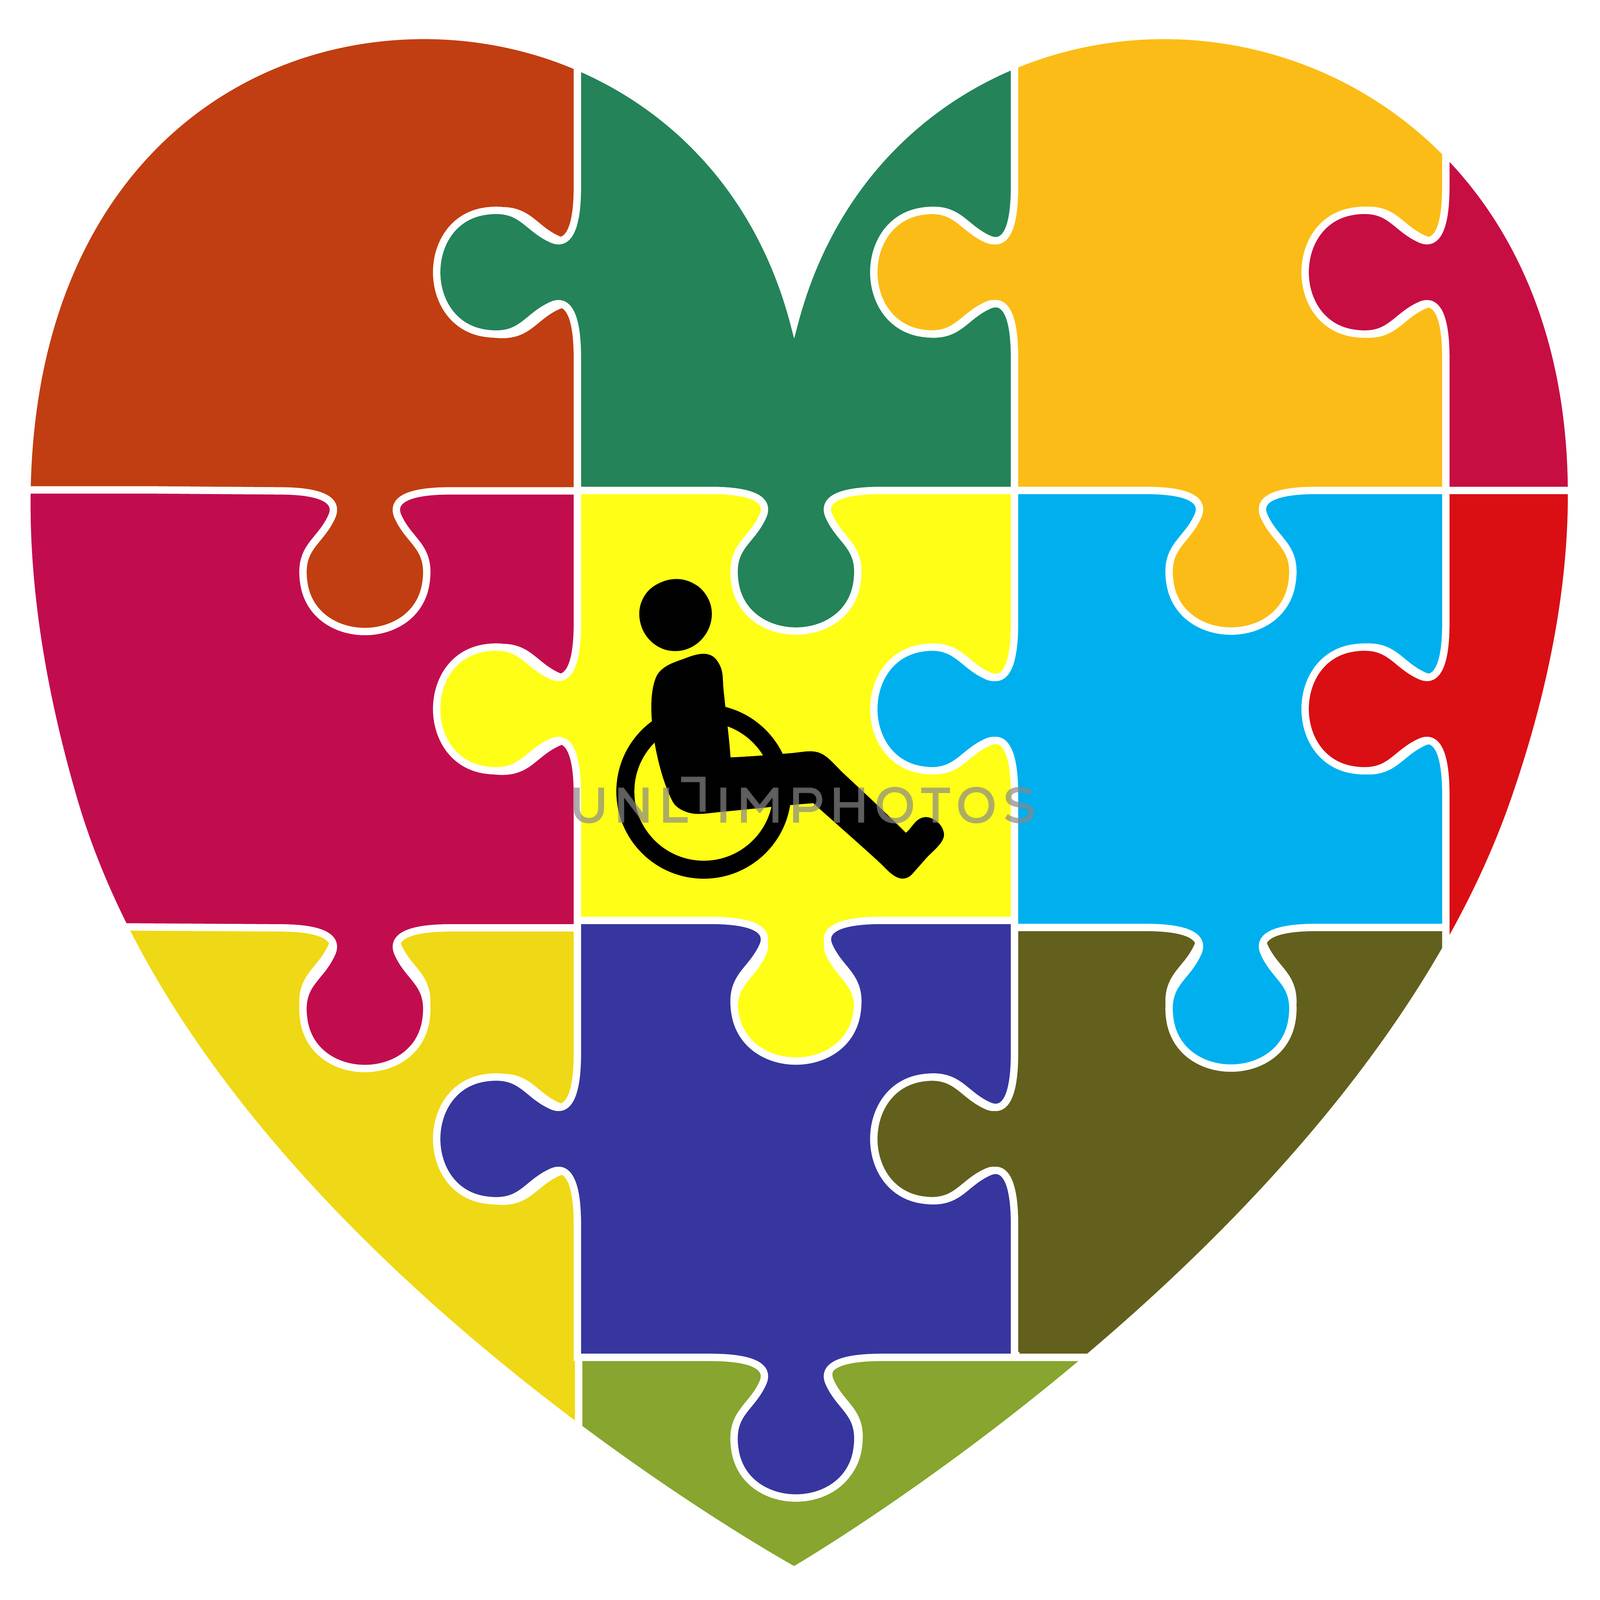 Symbol for the successful integration of handicapped people into community living